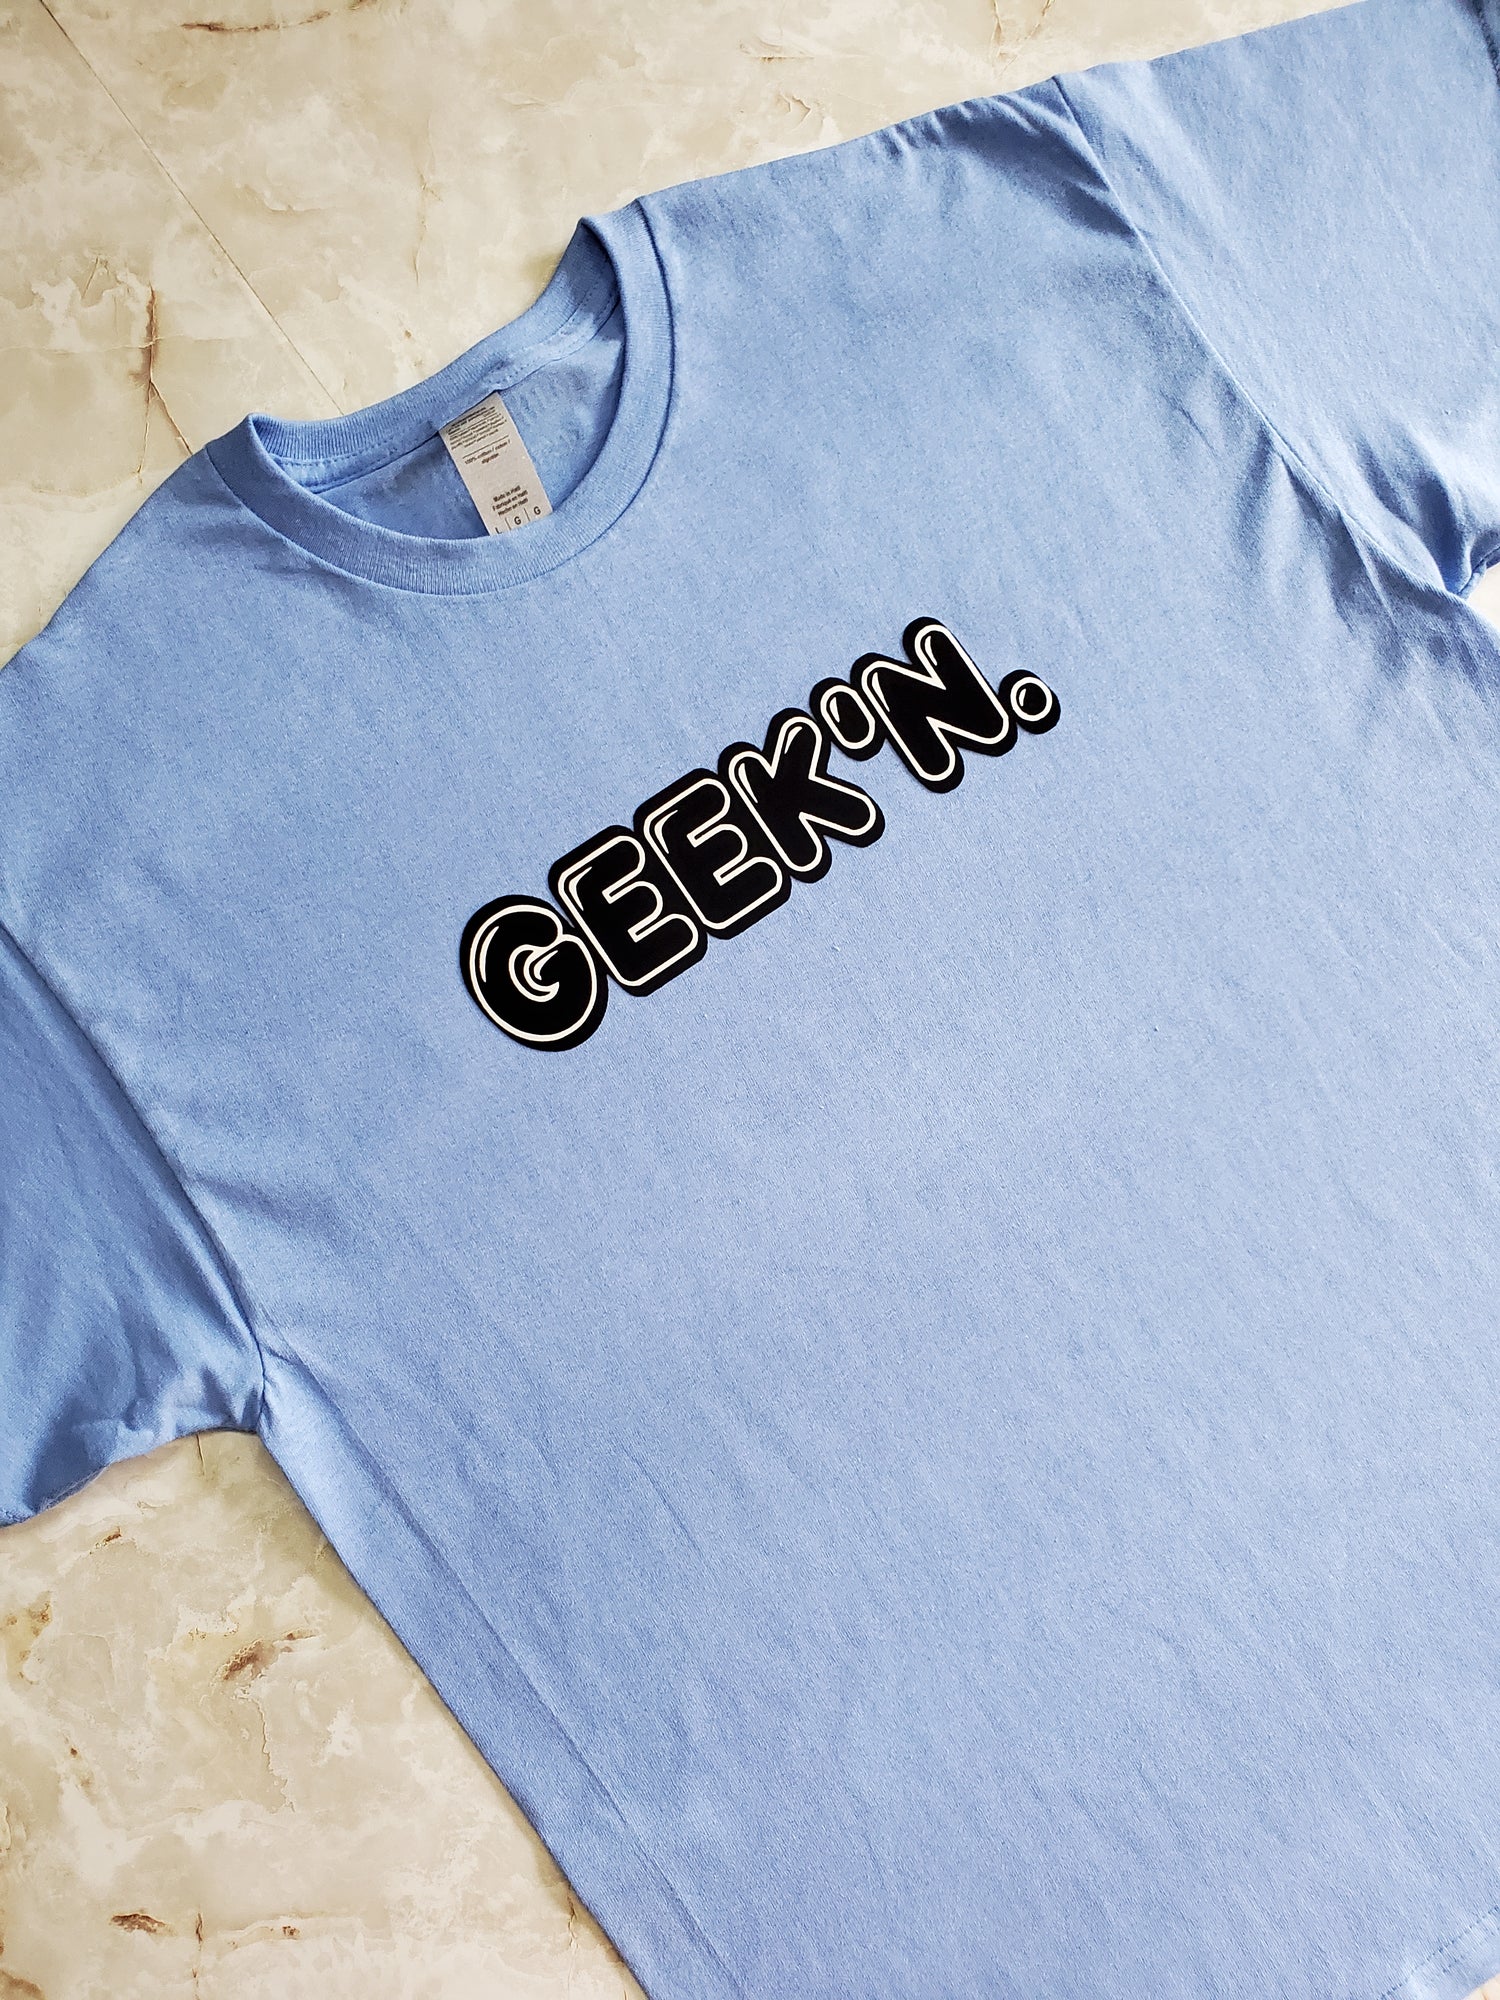 GEEK'N. T-Shirt - Centre Ave Clothing Co.